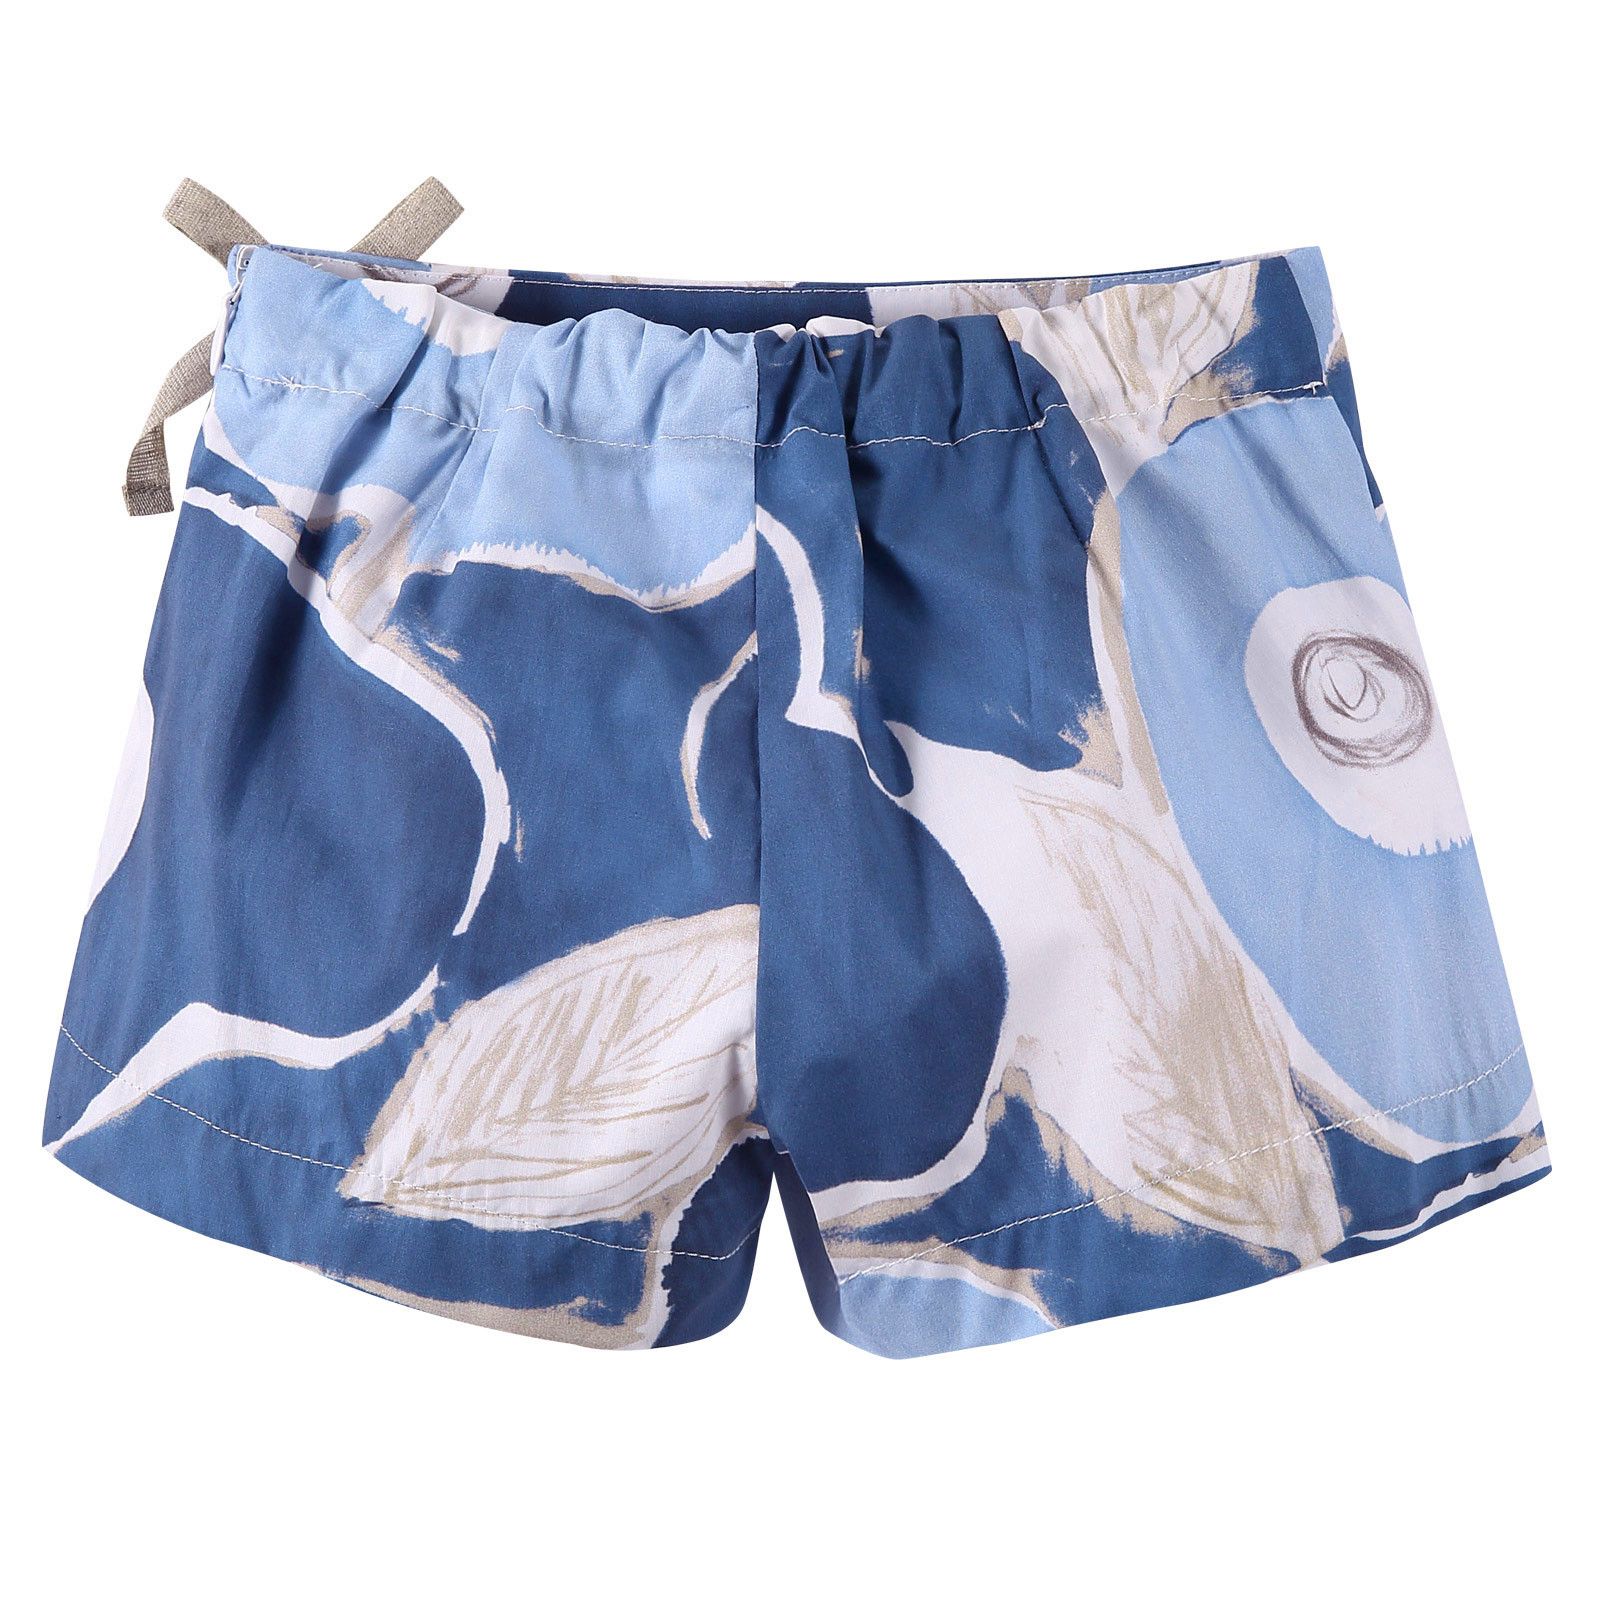 Girls Blue Printed Cotton Shorts With Bow Trims - CÉMAROSE | Children's Fashion Store - 2